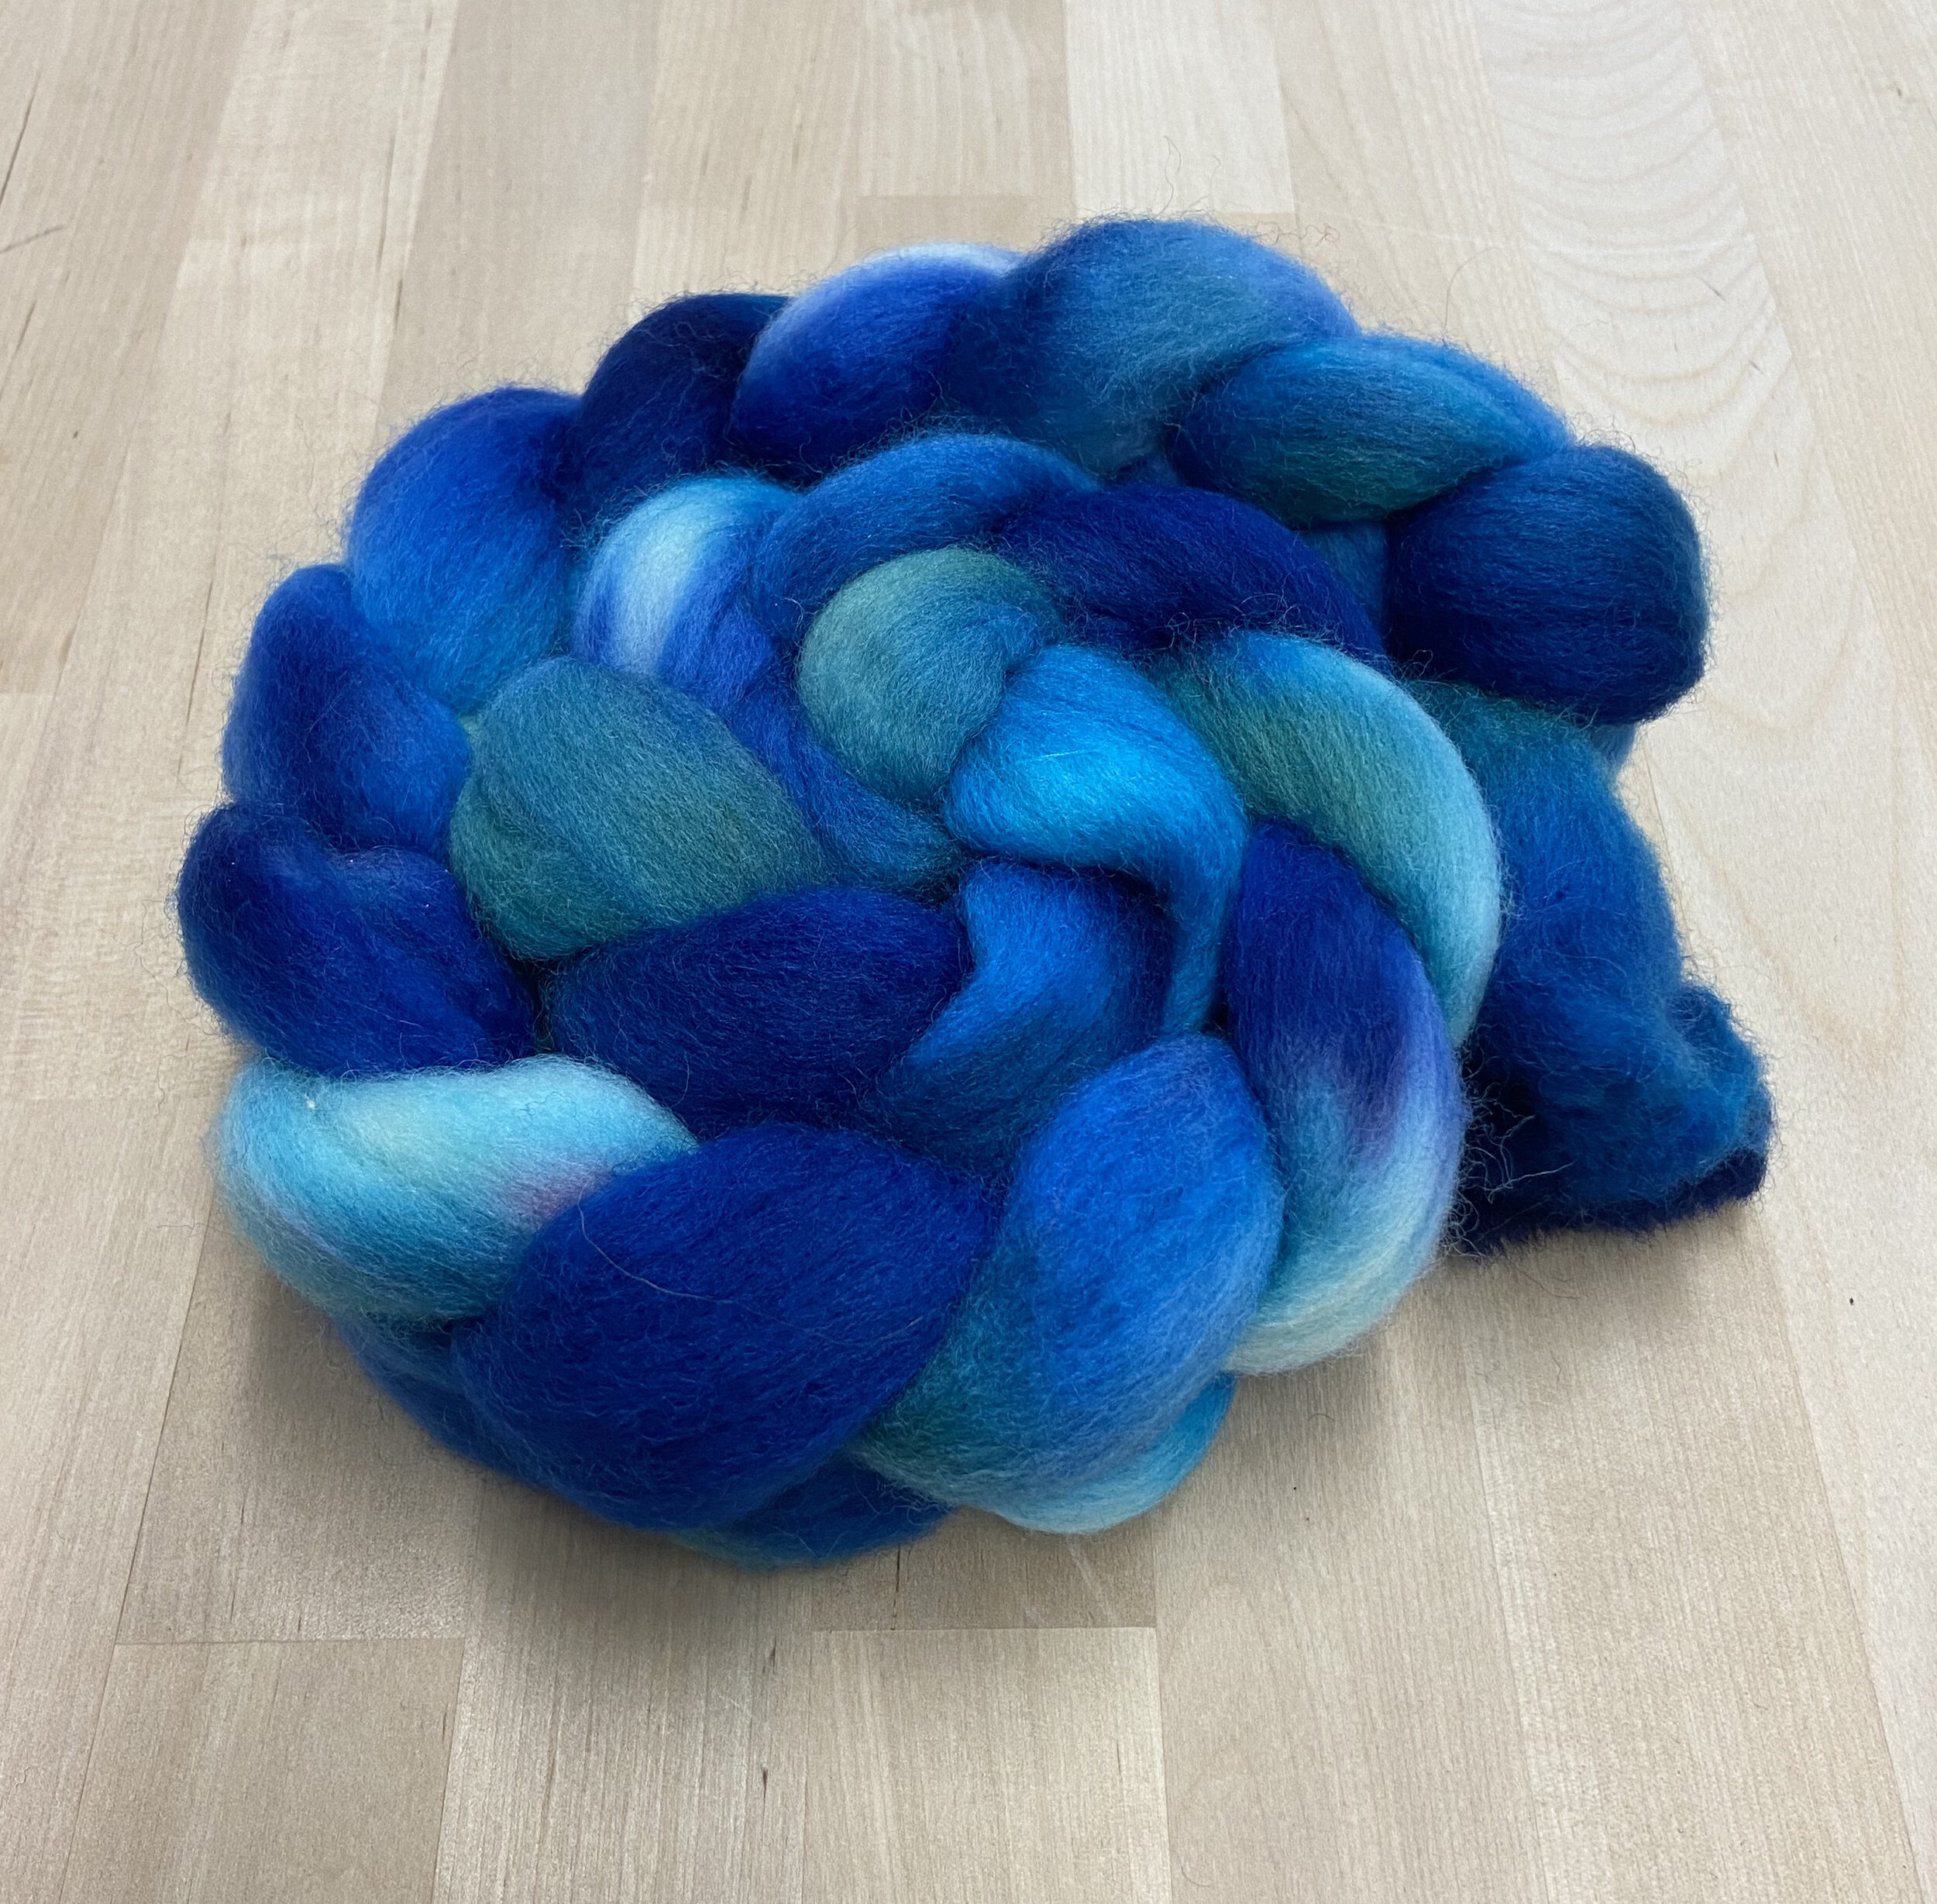 Rug Hooking Wool Roving or Fleece - Roughly 4 Ounce of Hand Dyed